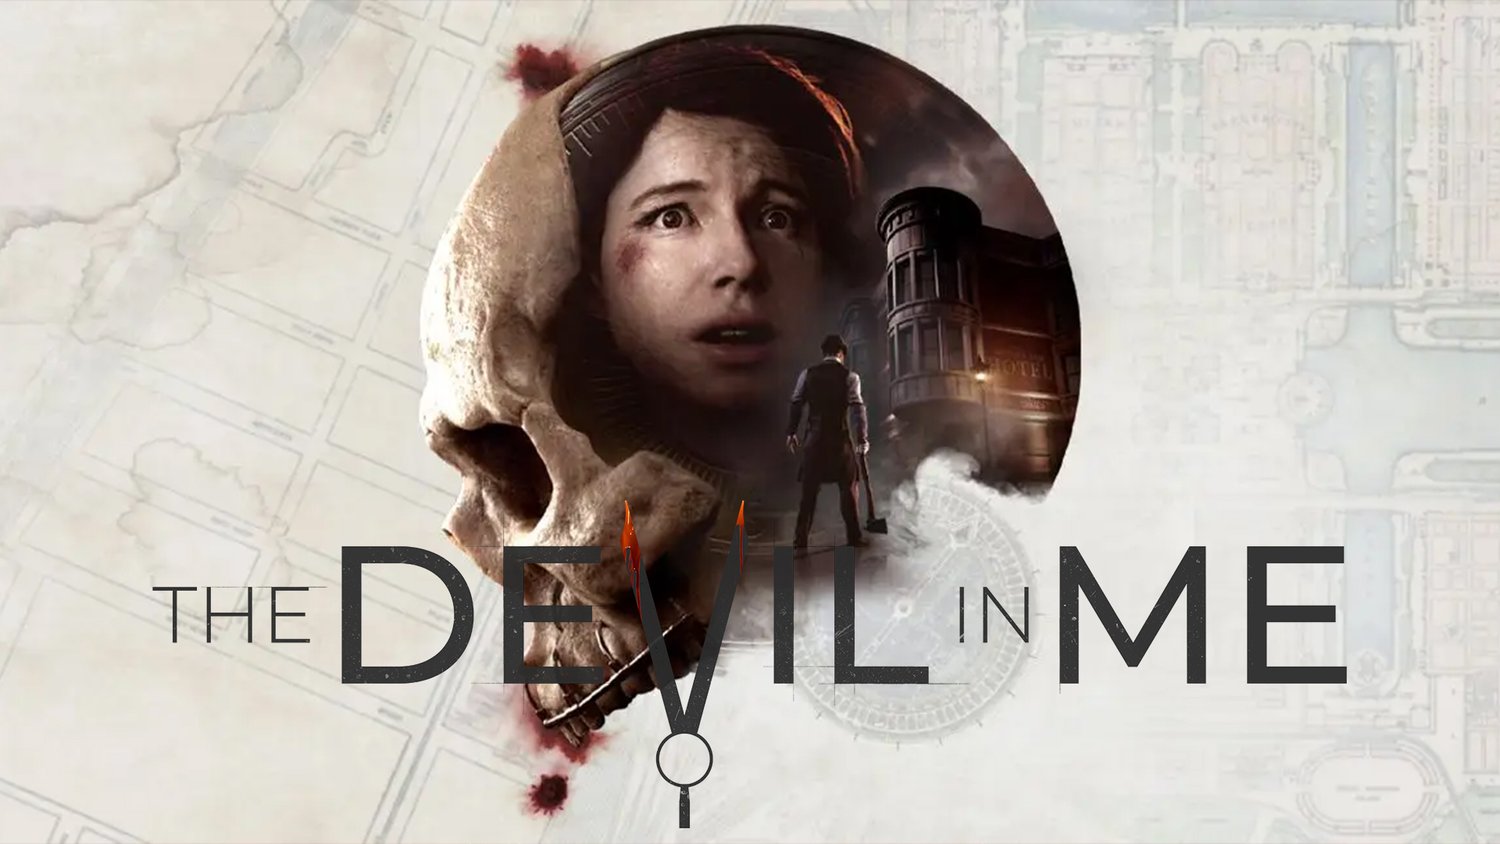 Check in with this new trailer for The Devil In Me, the next chapter of the Dark Pictures Anthology — Maxi-Geek